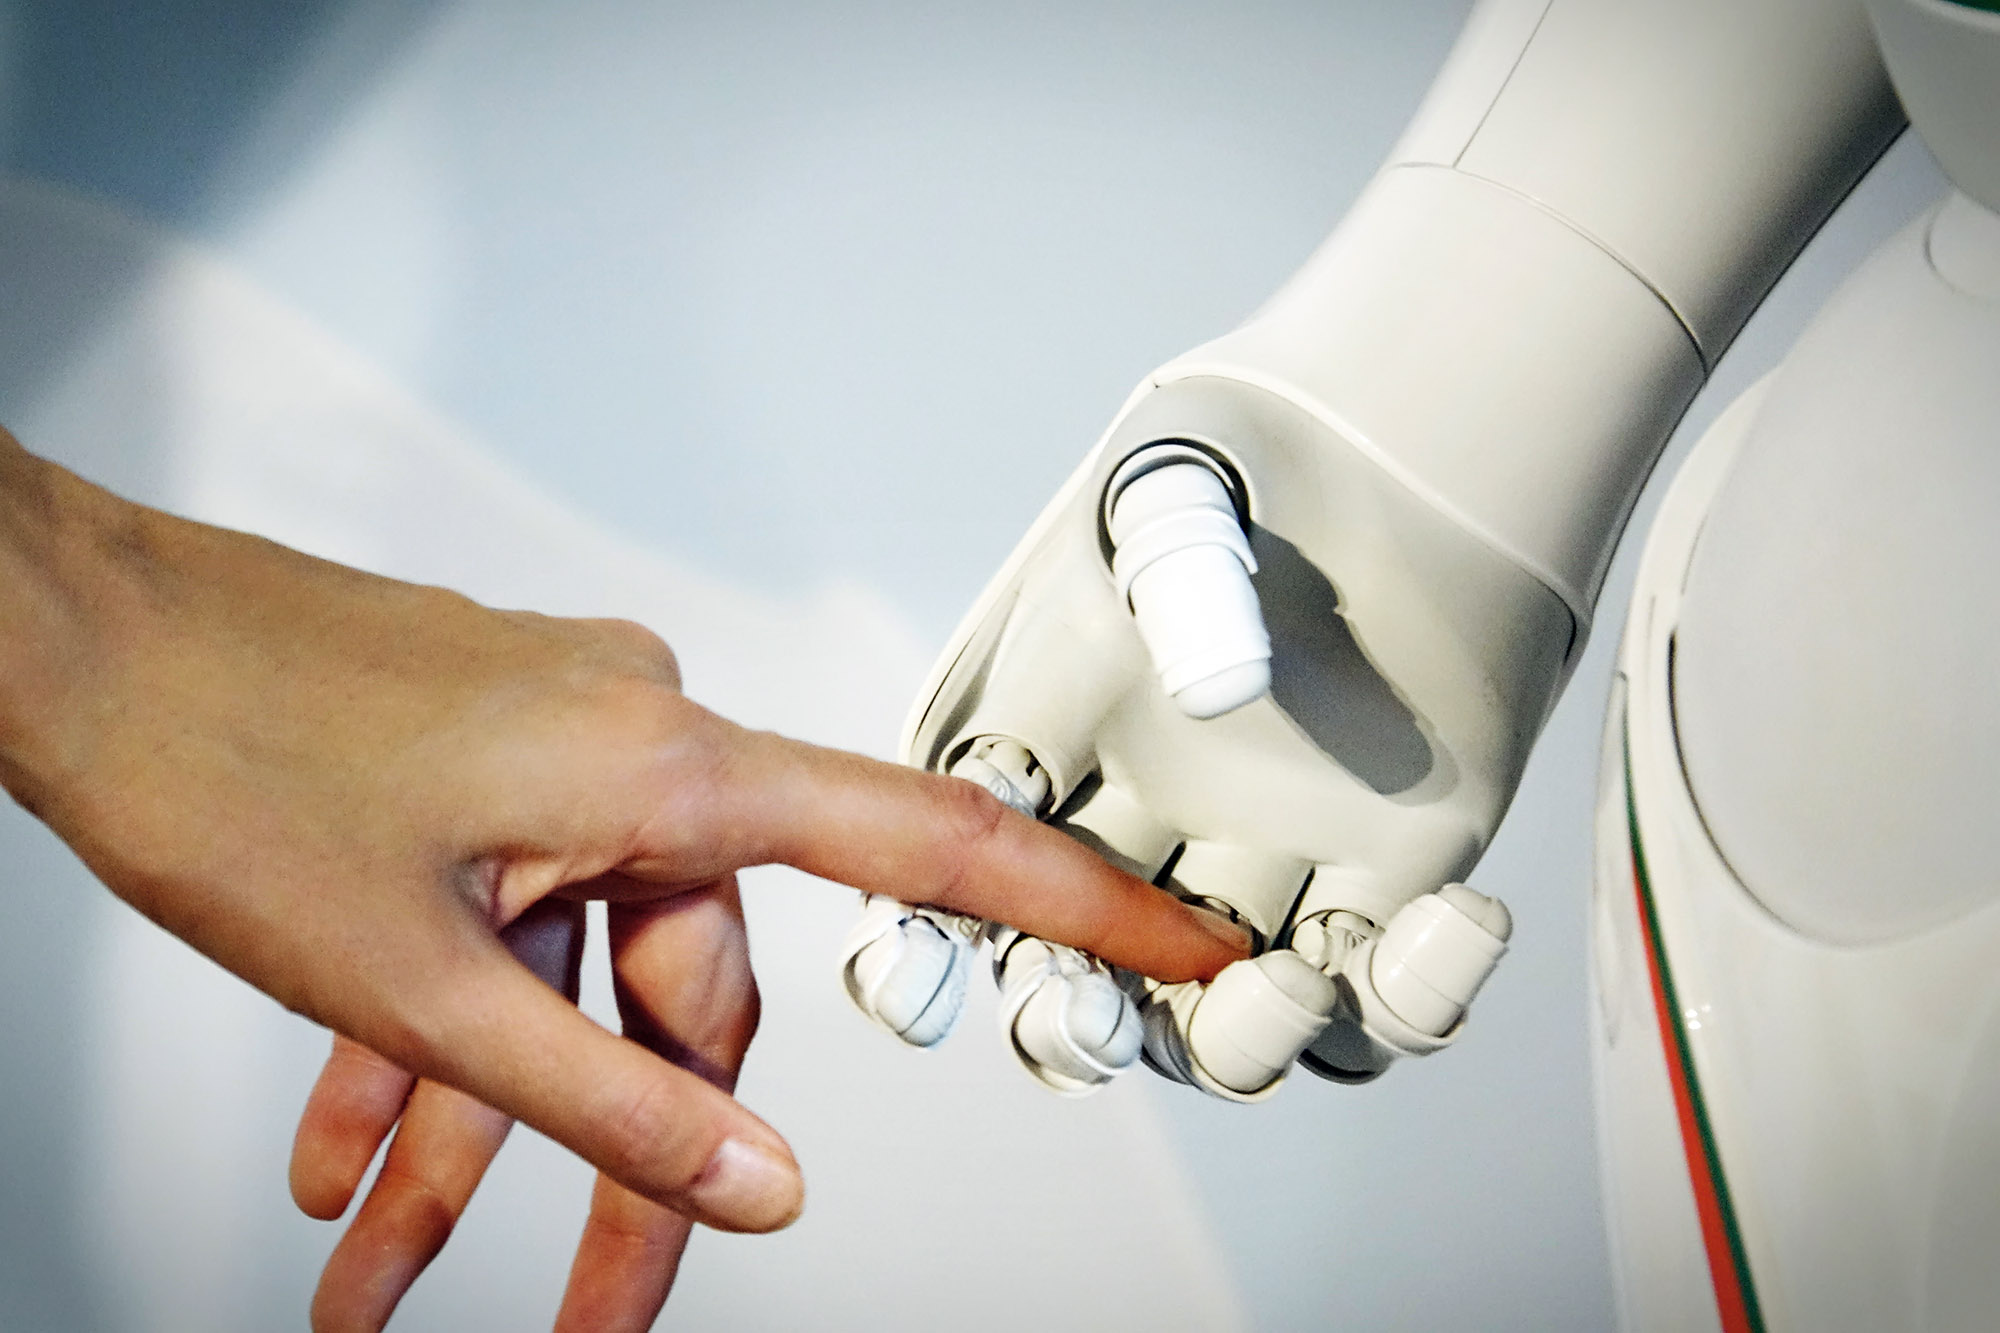 How scientists are giving robots humanlike tactile senses